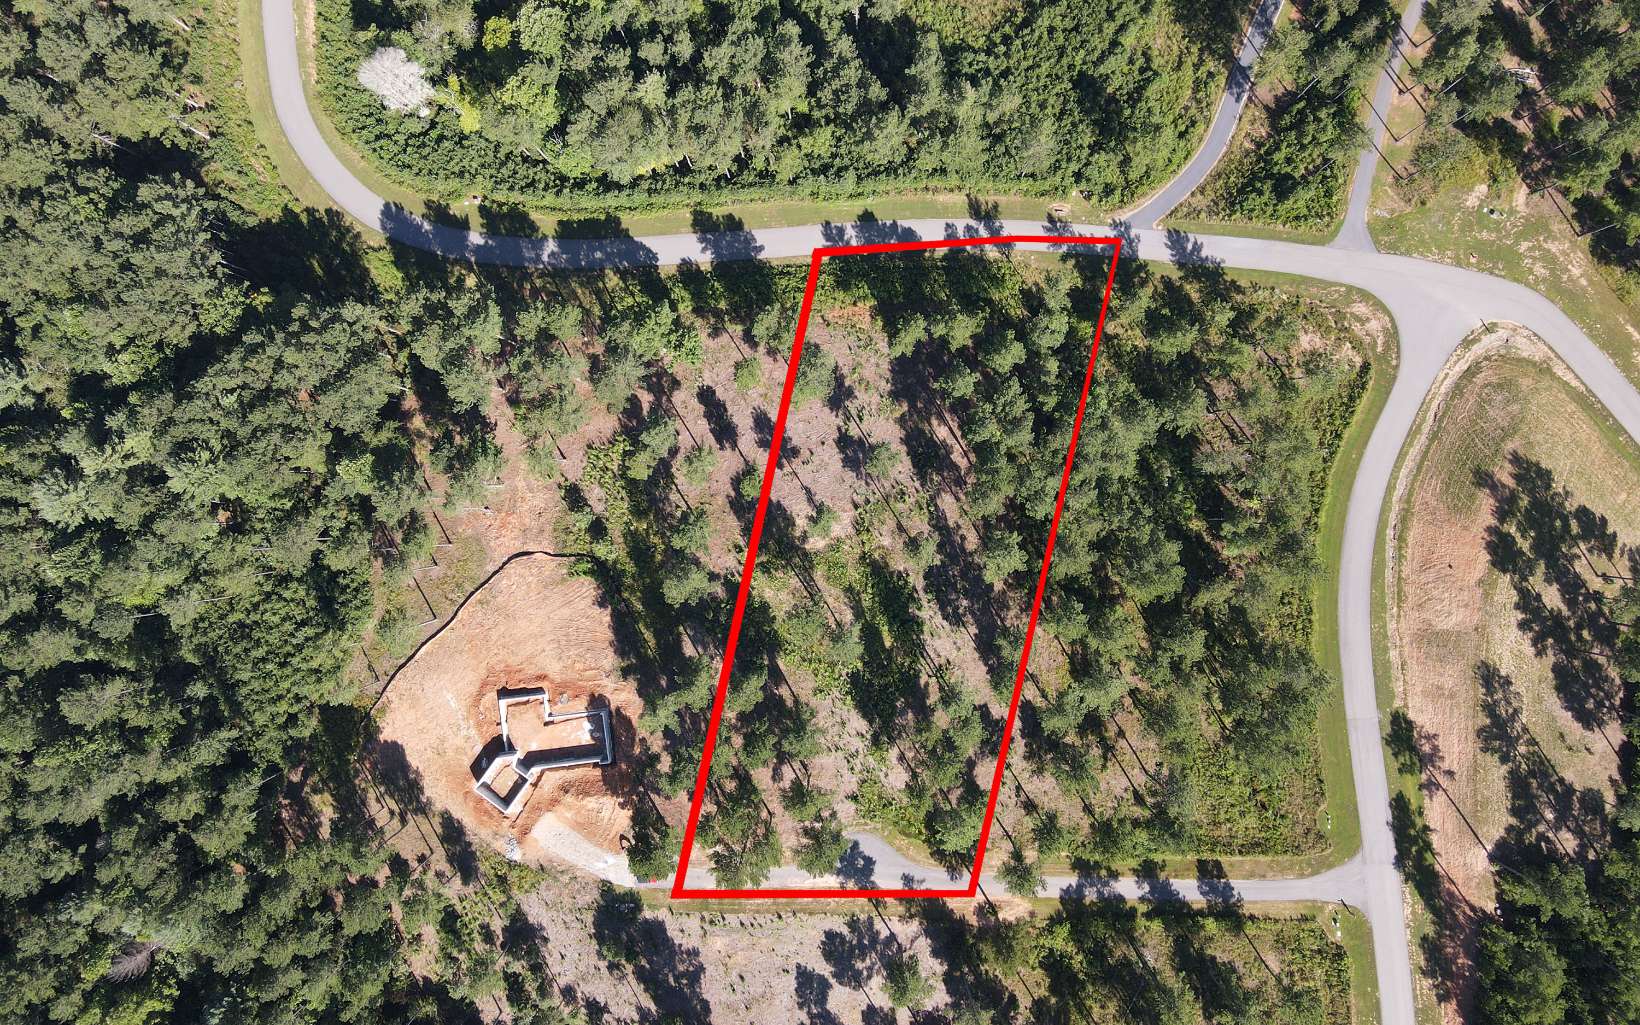 Don't miss this opportunity to own a 1.75 acre cleared lot in Union County's most desirable community with mountain and lake views - within walking distance to the marina park and lakeside area that includes docks, a sunning deck with swim area, canoe and kayak launching, firepit, covered community boat slips and boat ramp. Amenities are plentiful, including underground utilities, fiber optic availability, mountaintop lodge/clubhouse with saltwater pool, breathtaking views, kiddie splash pool, outdoor fireplace, outdoor grills and kitchen, walking trails, picnic areas, exercise park and equestrian area.